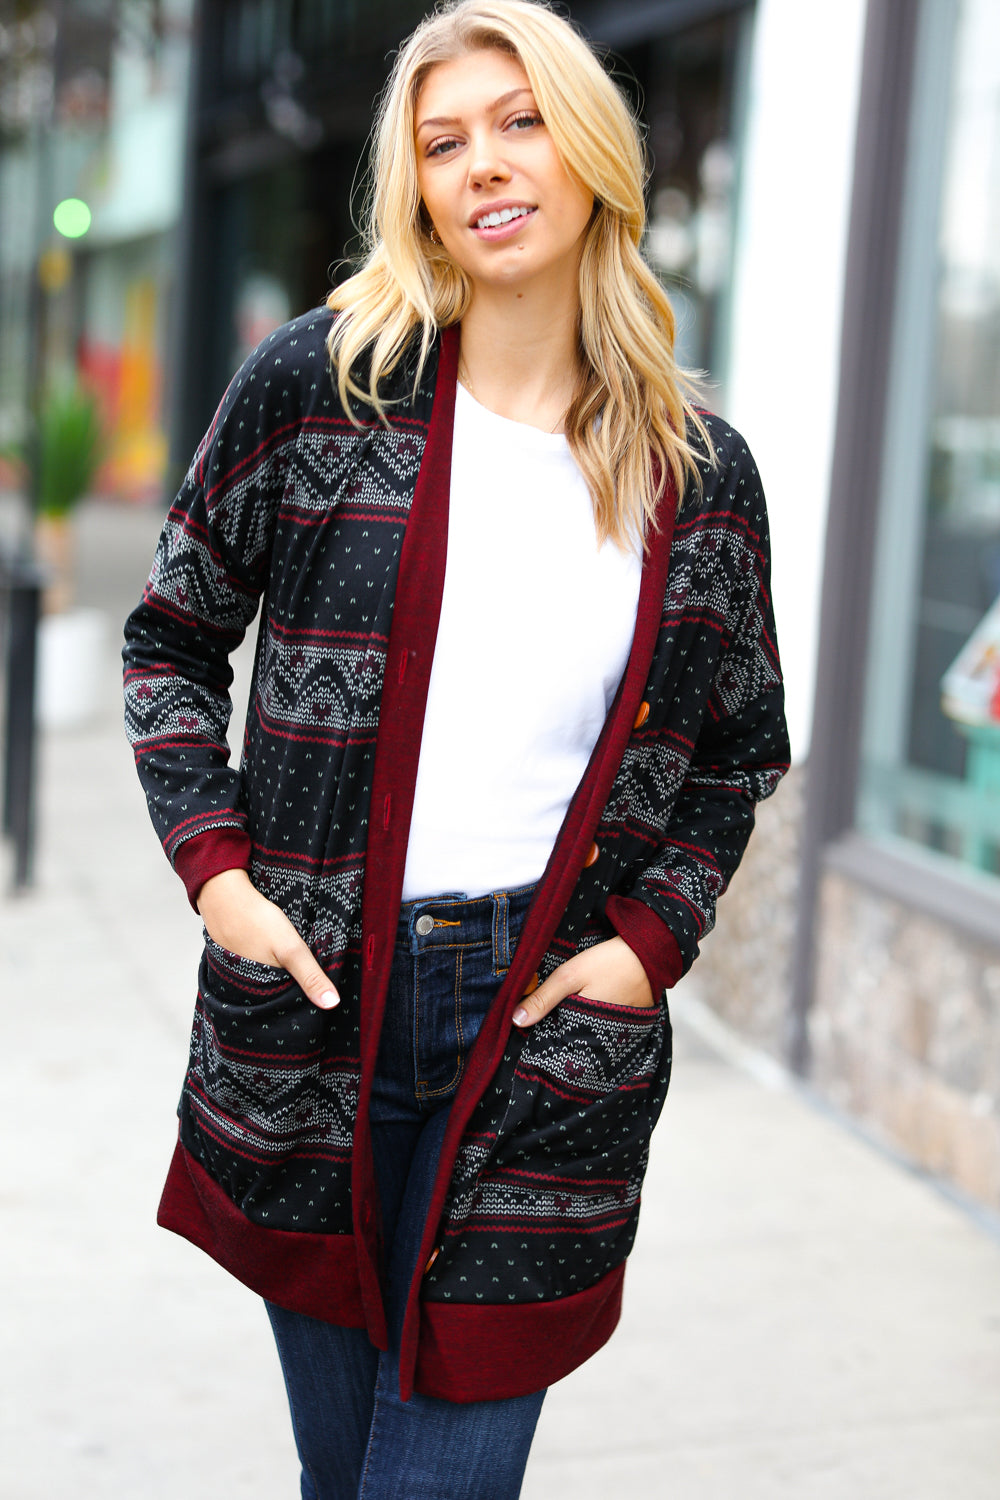 All Class Burgundy Holiday Print Button Cardigan - The Magnolia Cottage Boutique